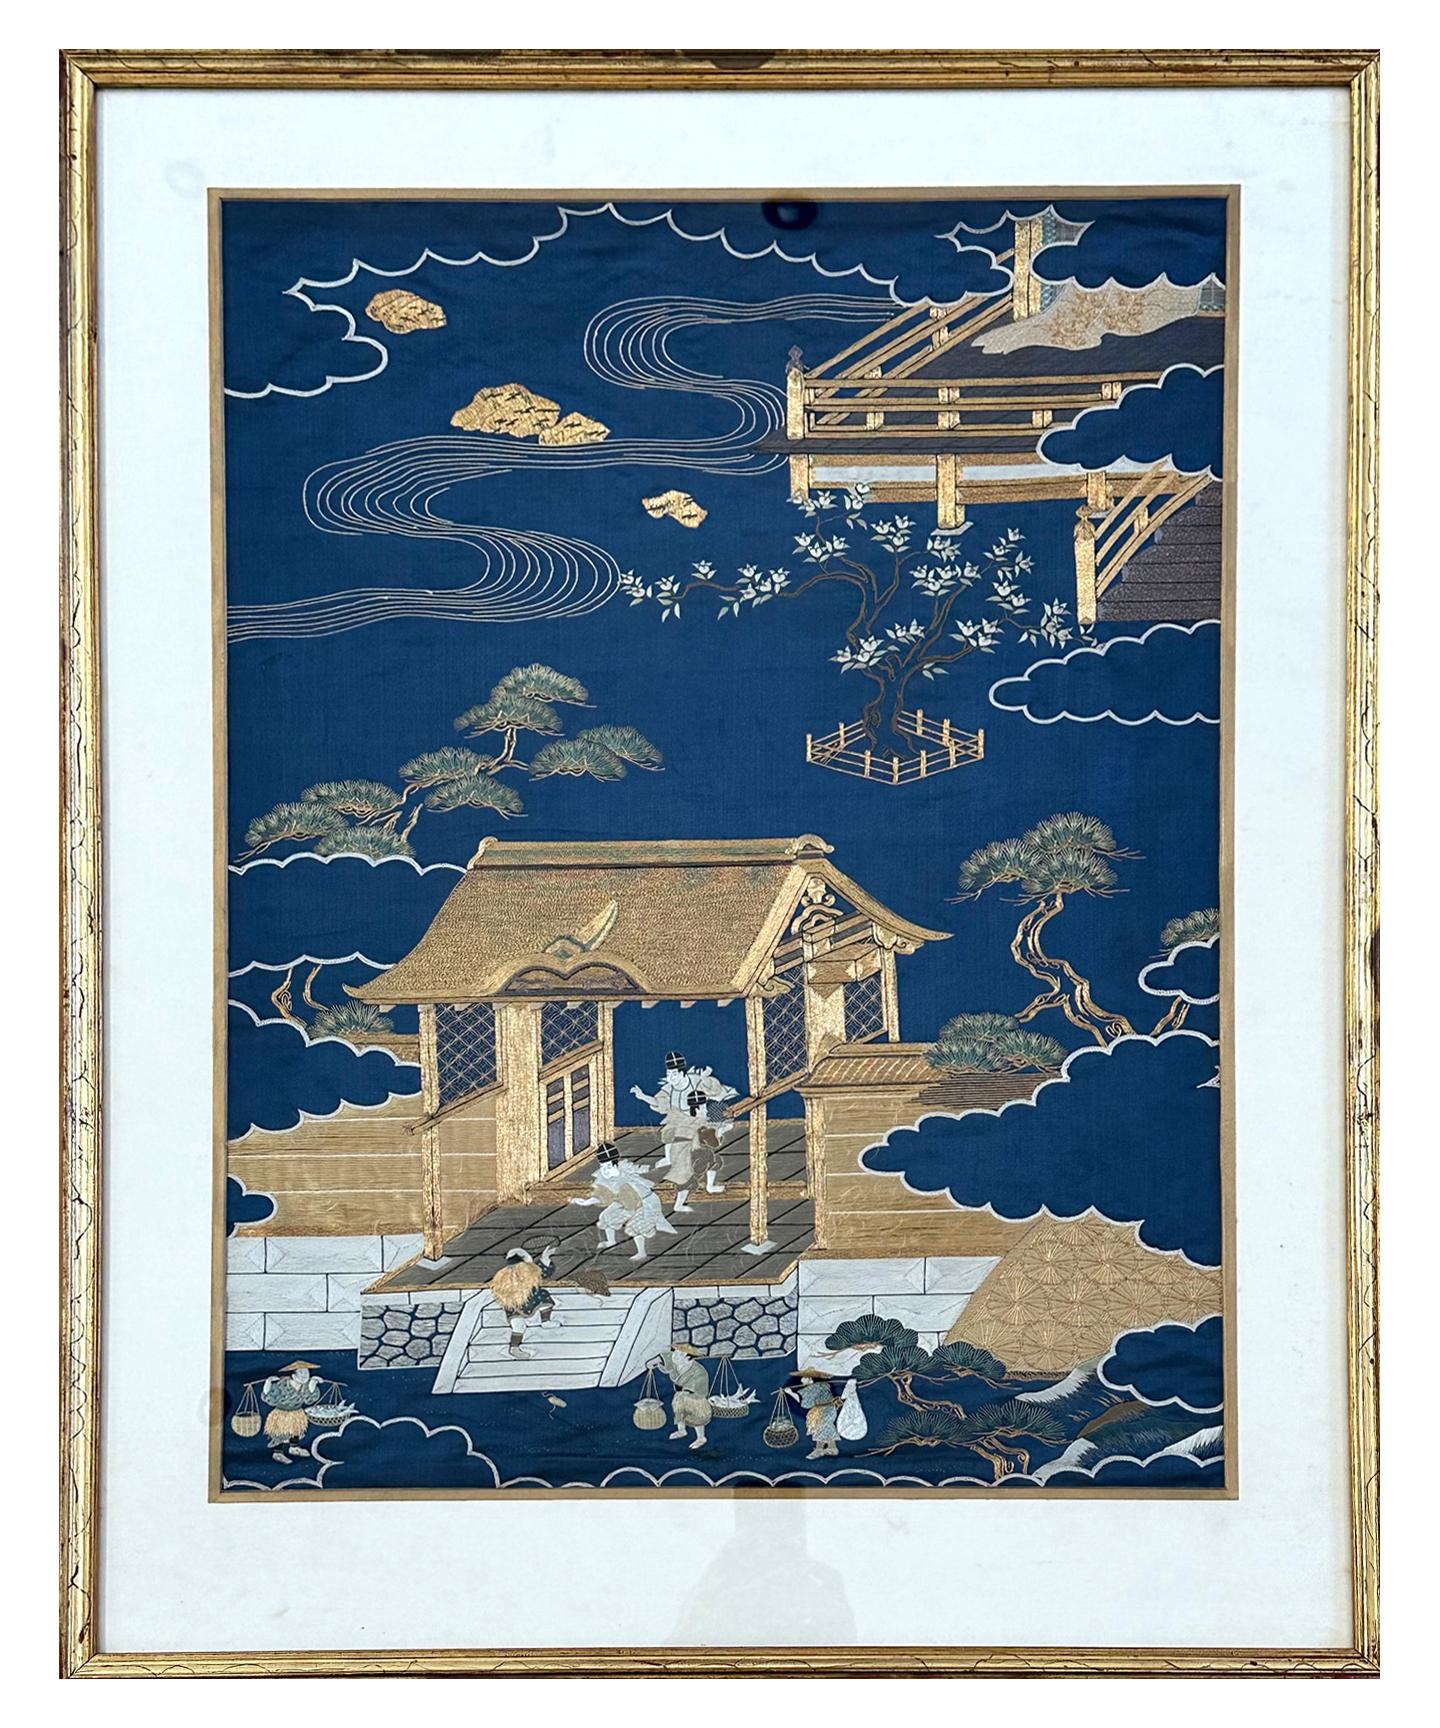 A Japanese silk Fukusa Panel housed in a gilt frame circa late 19th century of Meiji Period. Fukusa is a traditional Japanese textile art used as a wrap for presenting gifts at important occasions. On the deep blue background, the elaborate